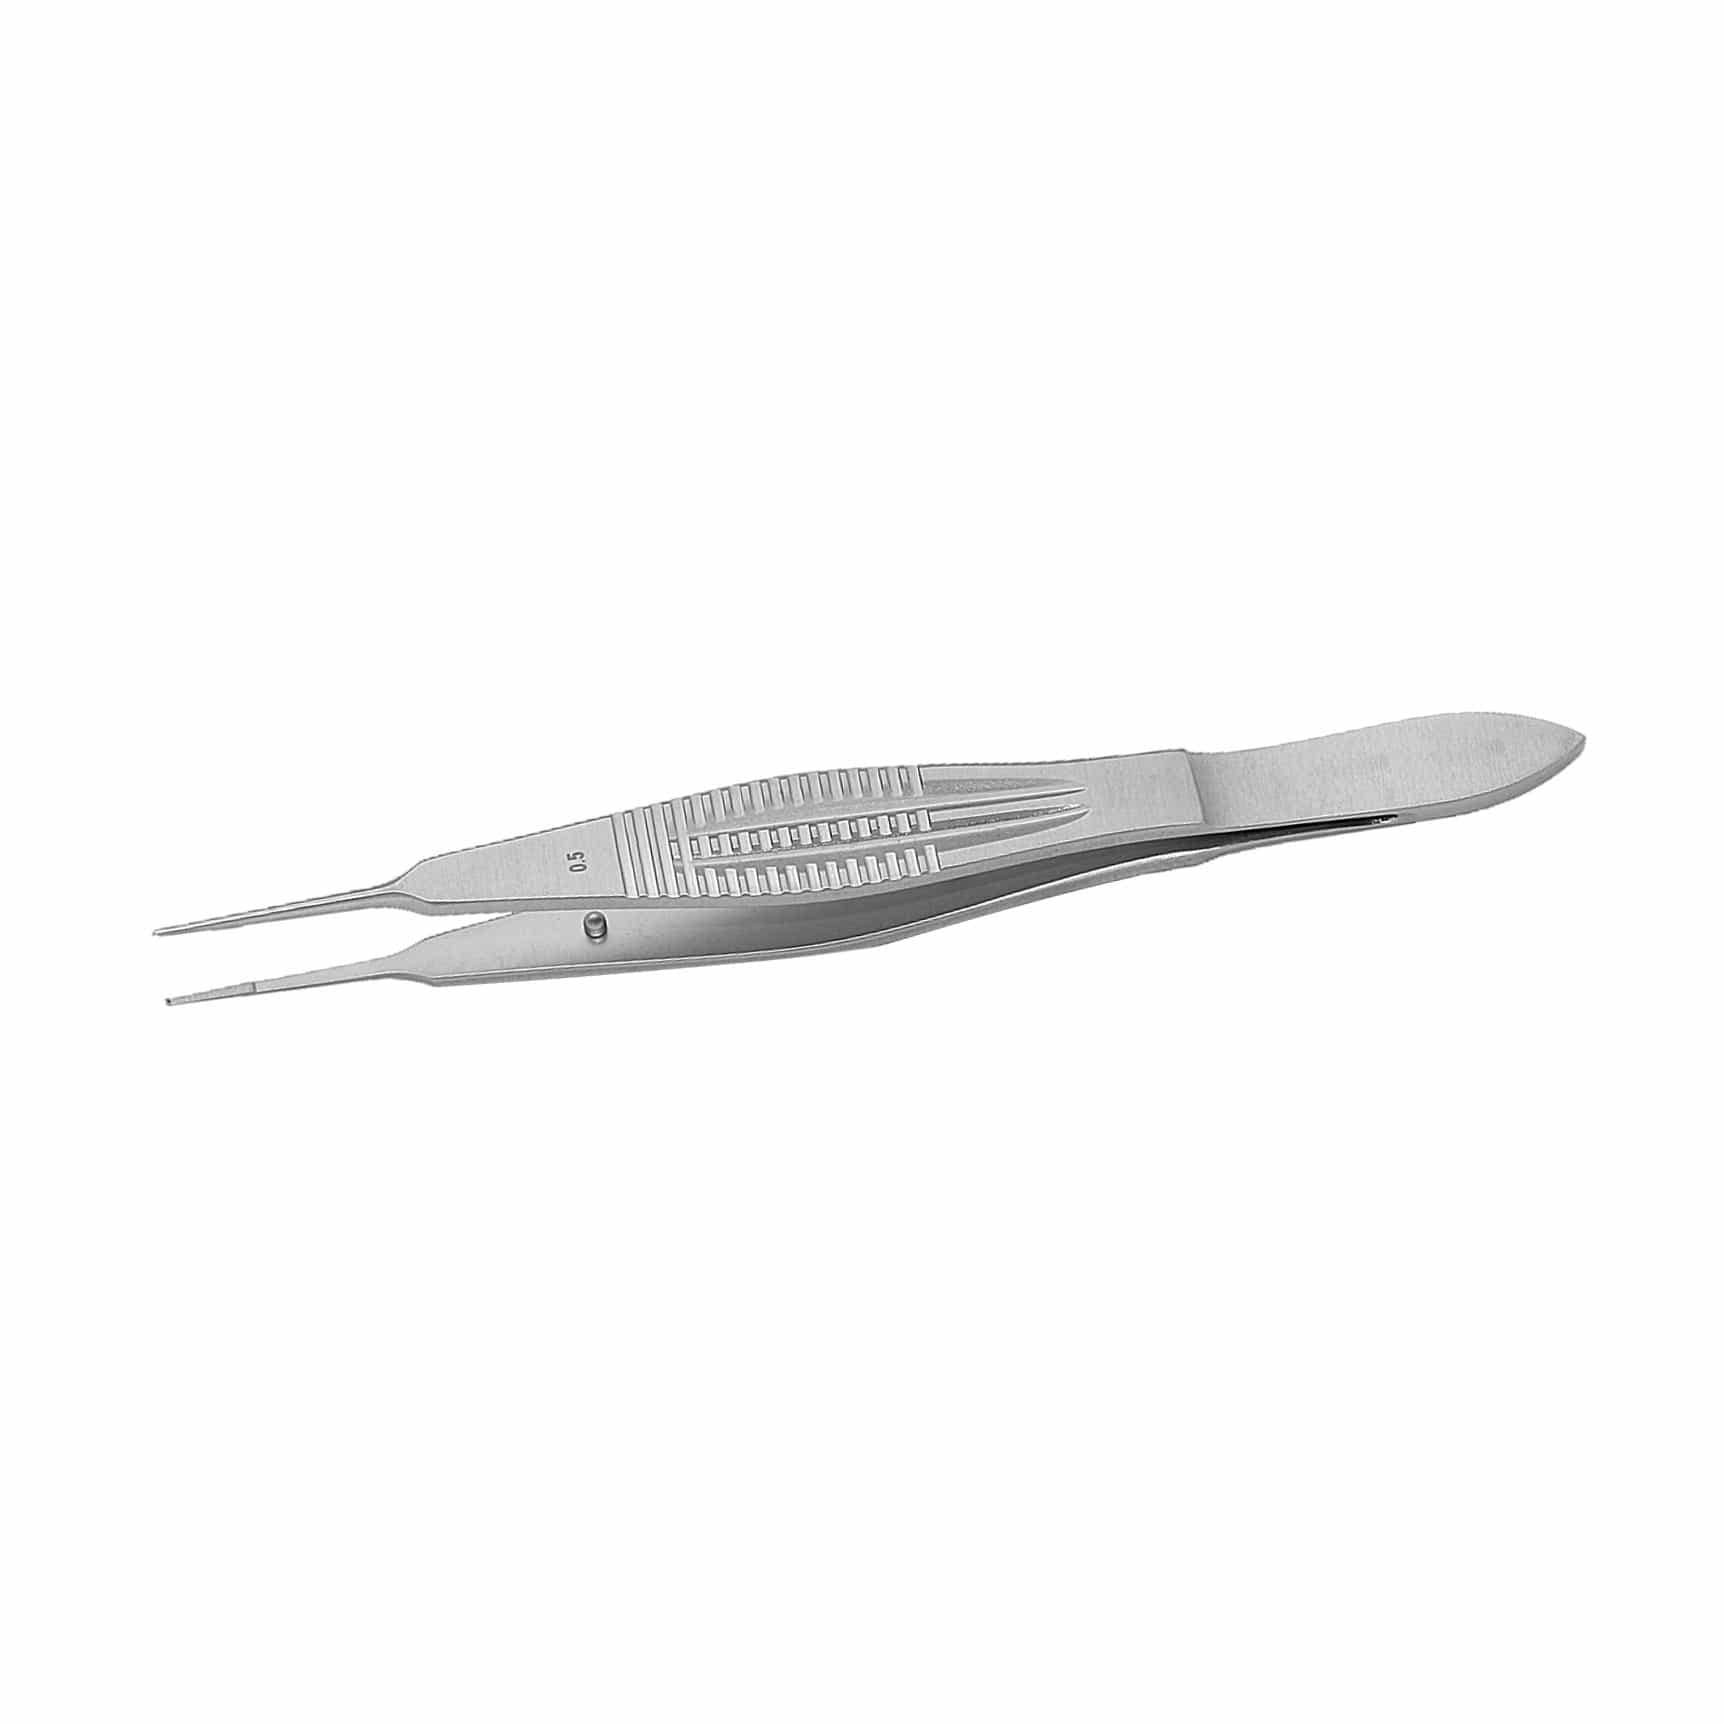 Armo Surgical Instruments 10.5cm / Straight Armo Castroveijo Corneal Forceps